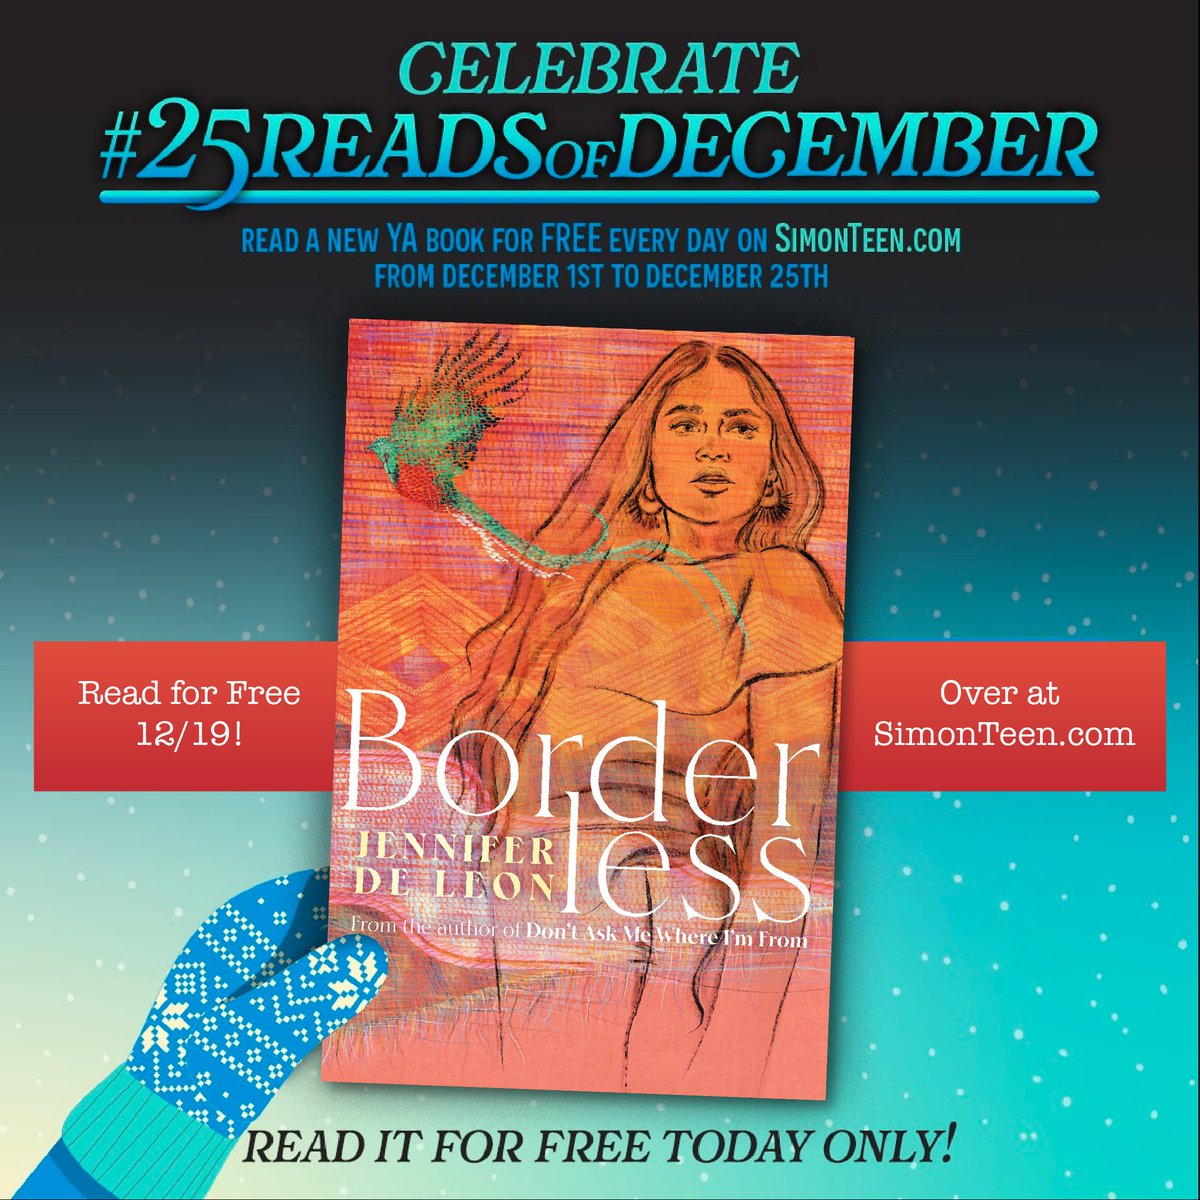 TODAY ONLY you can read BORDERLESS for free from @simonteen! Go here: simonteen.com/book/borderles… #decemberreads